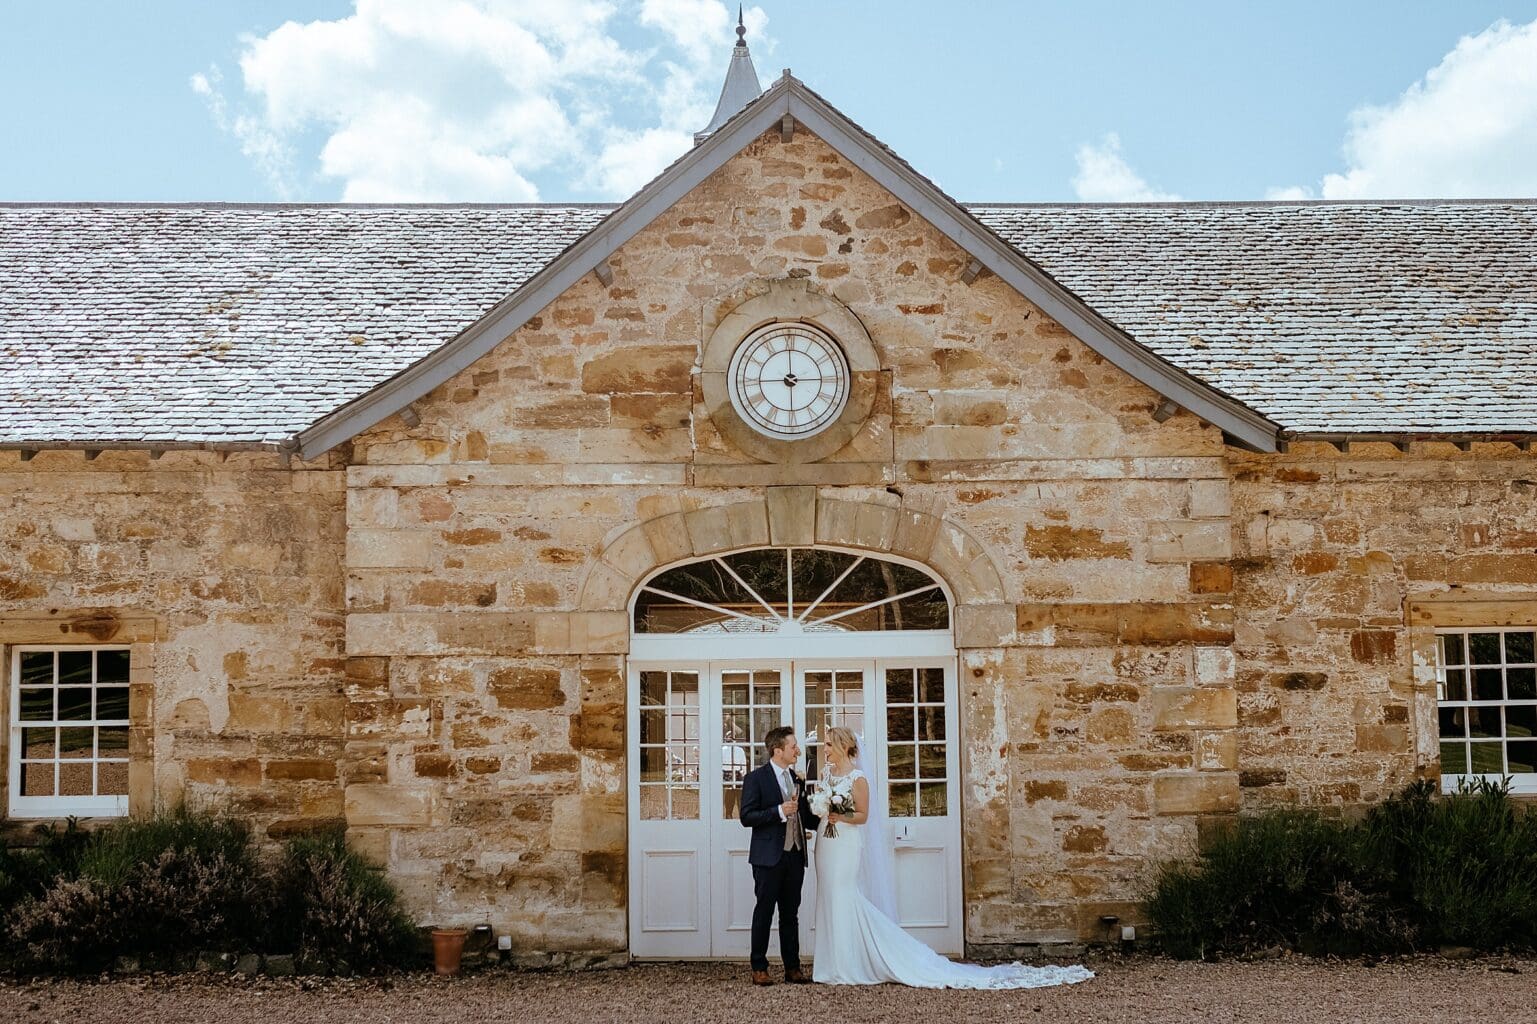 bride and groom standing in front of white door of stone building in courtyard on sunny day colstoun house wedding cost unique wedding venue scotland